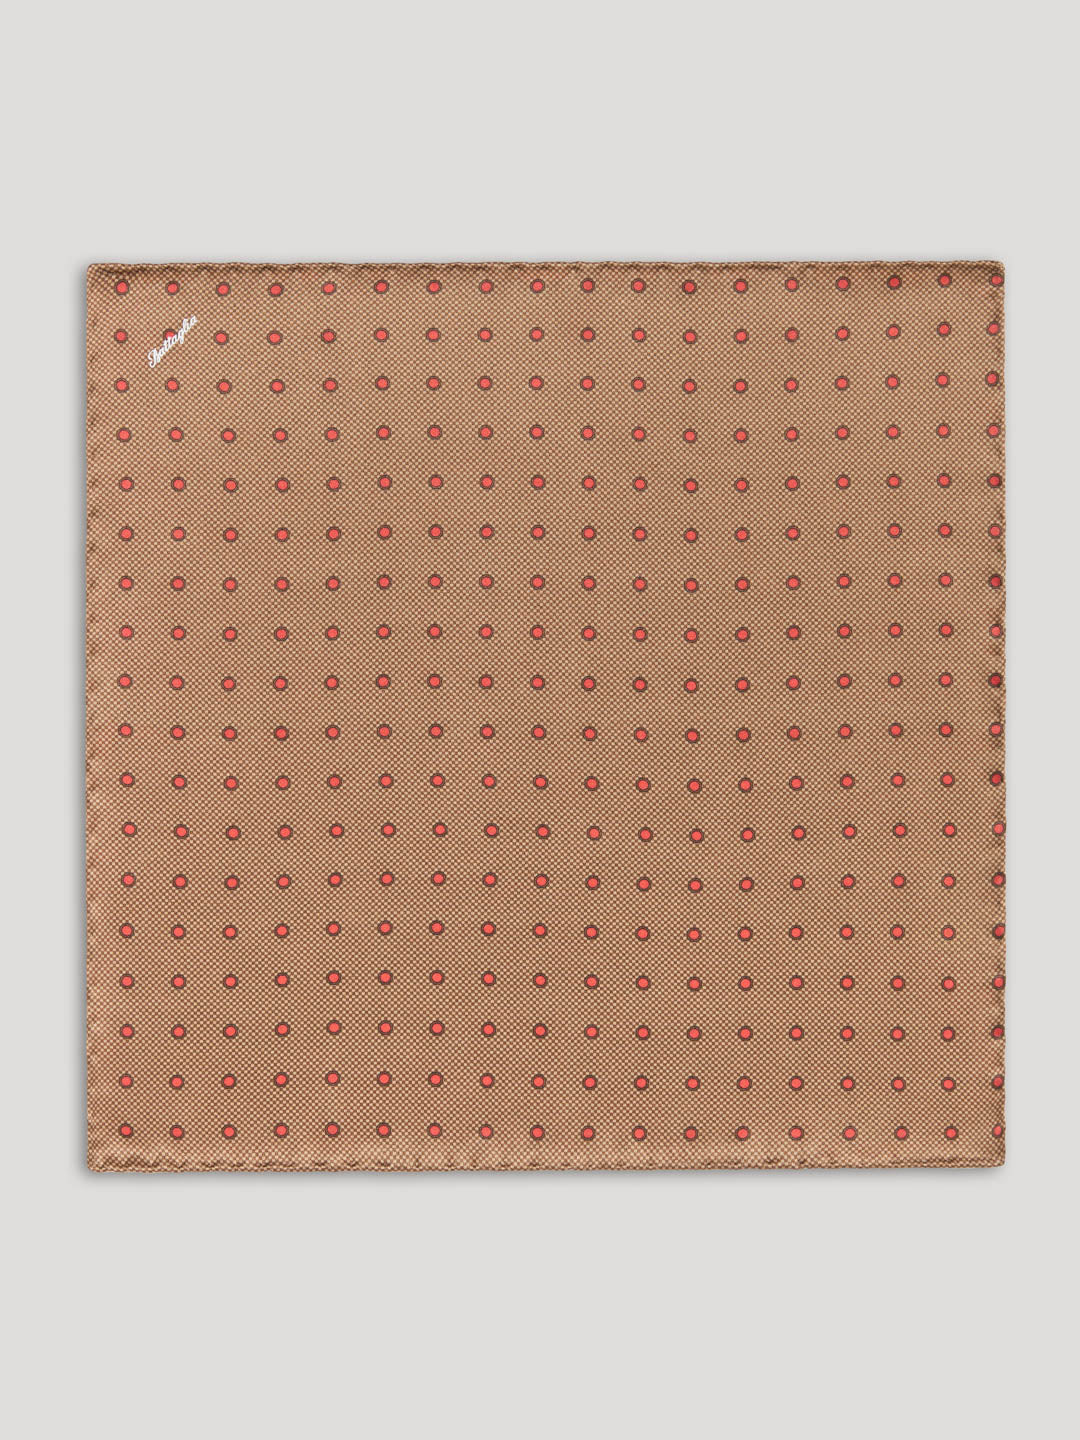 Brown handkerchief with red polkadots. 